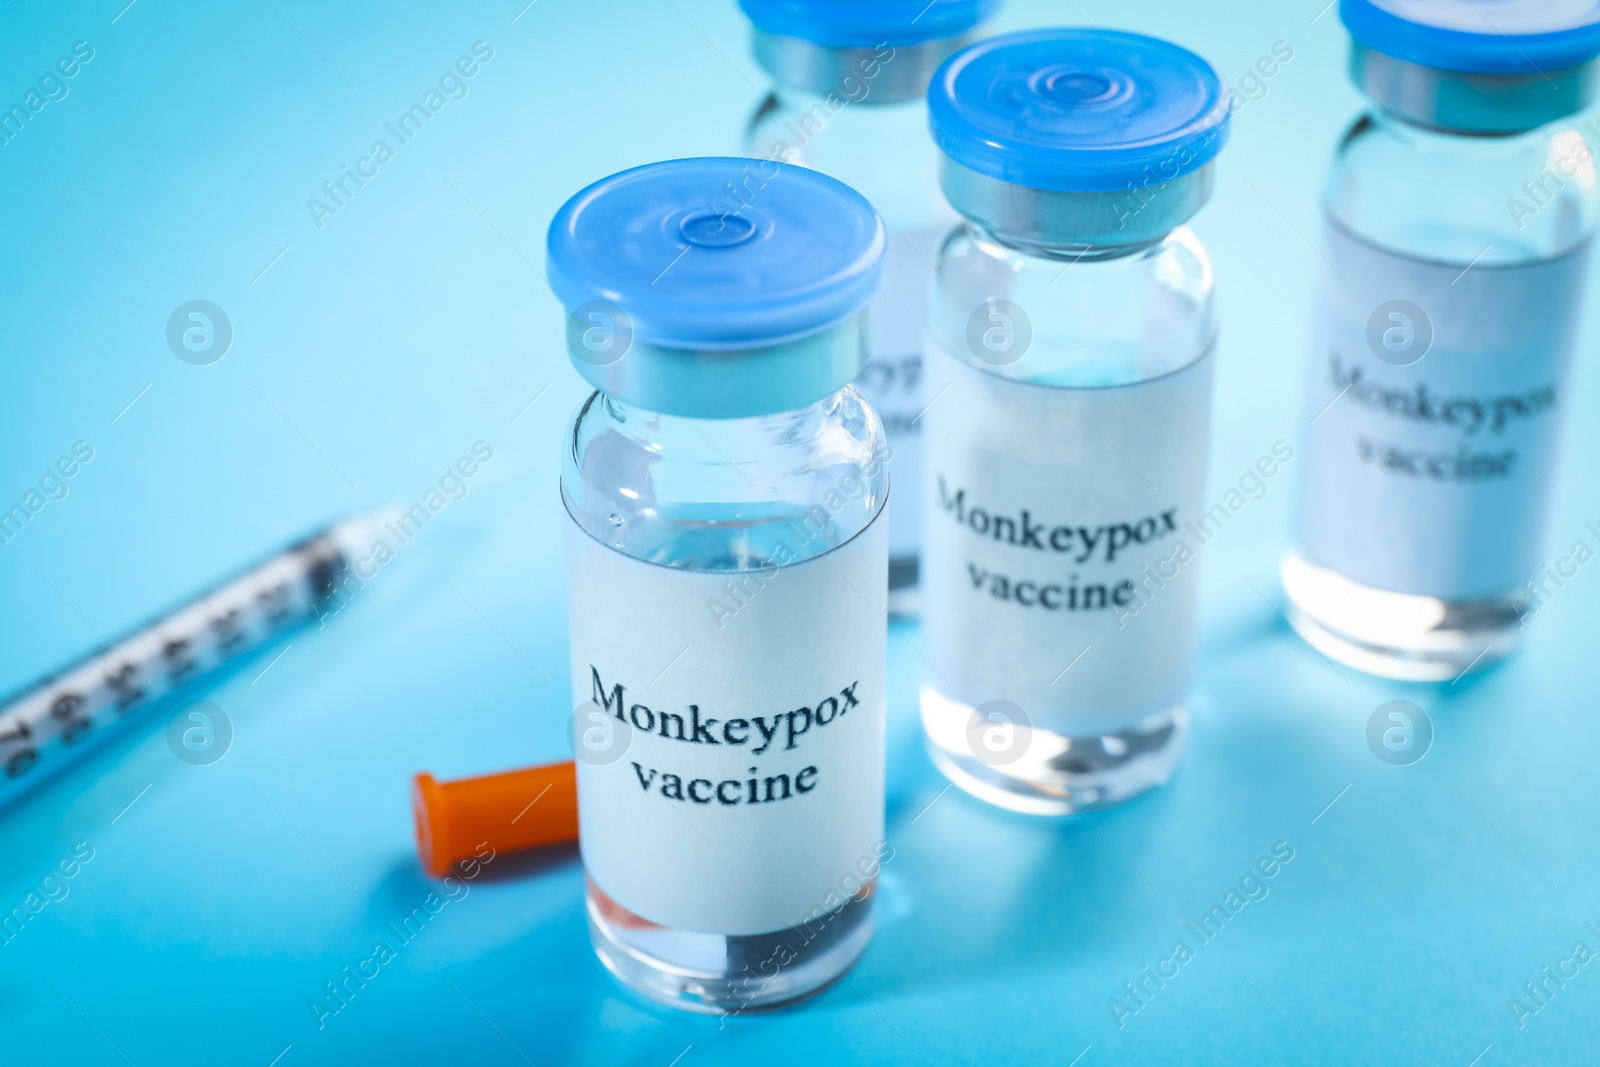 Photo of Monkeypox vaccine in glass vials and syringe on light blue background